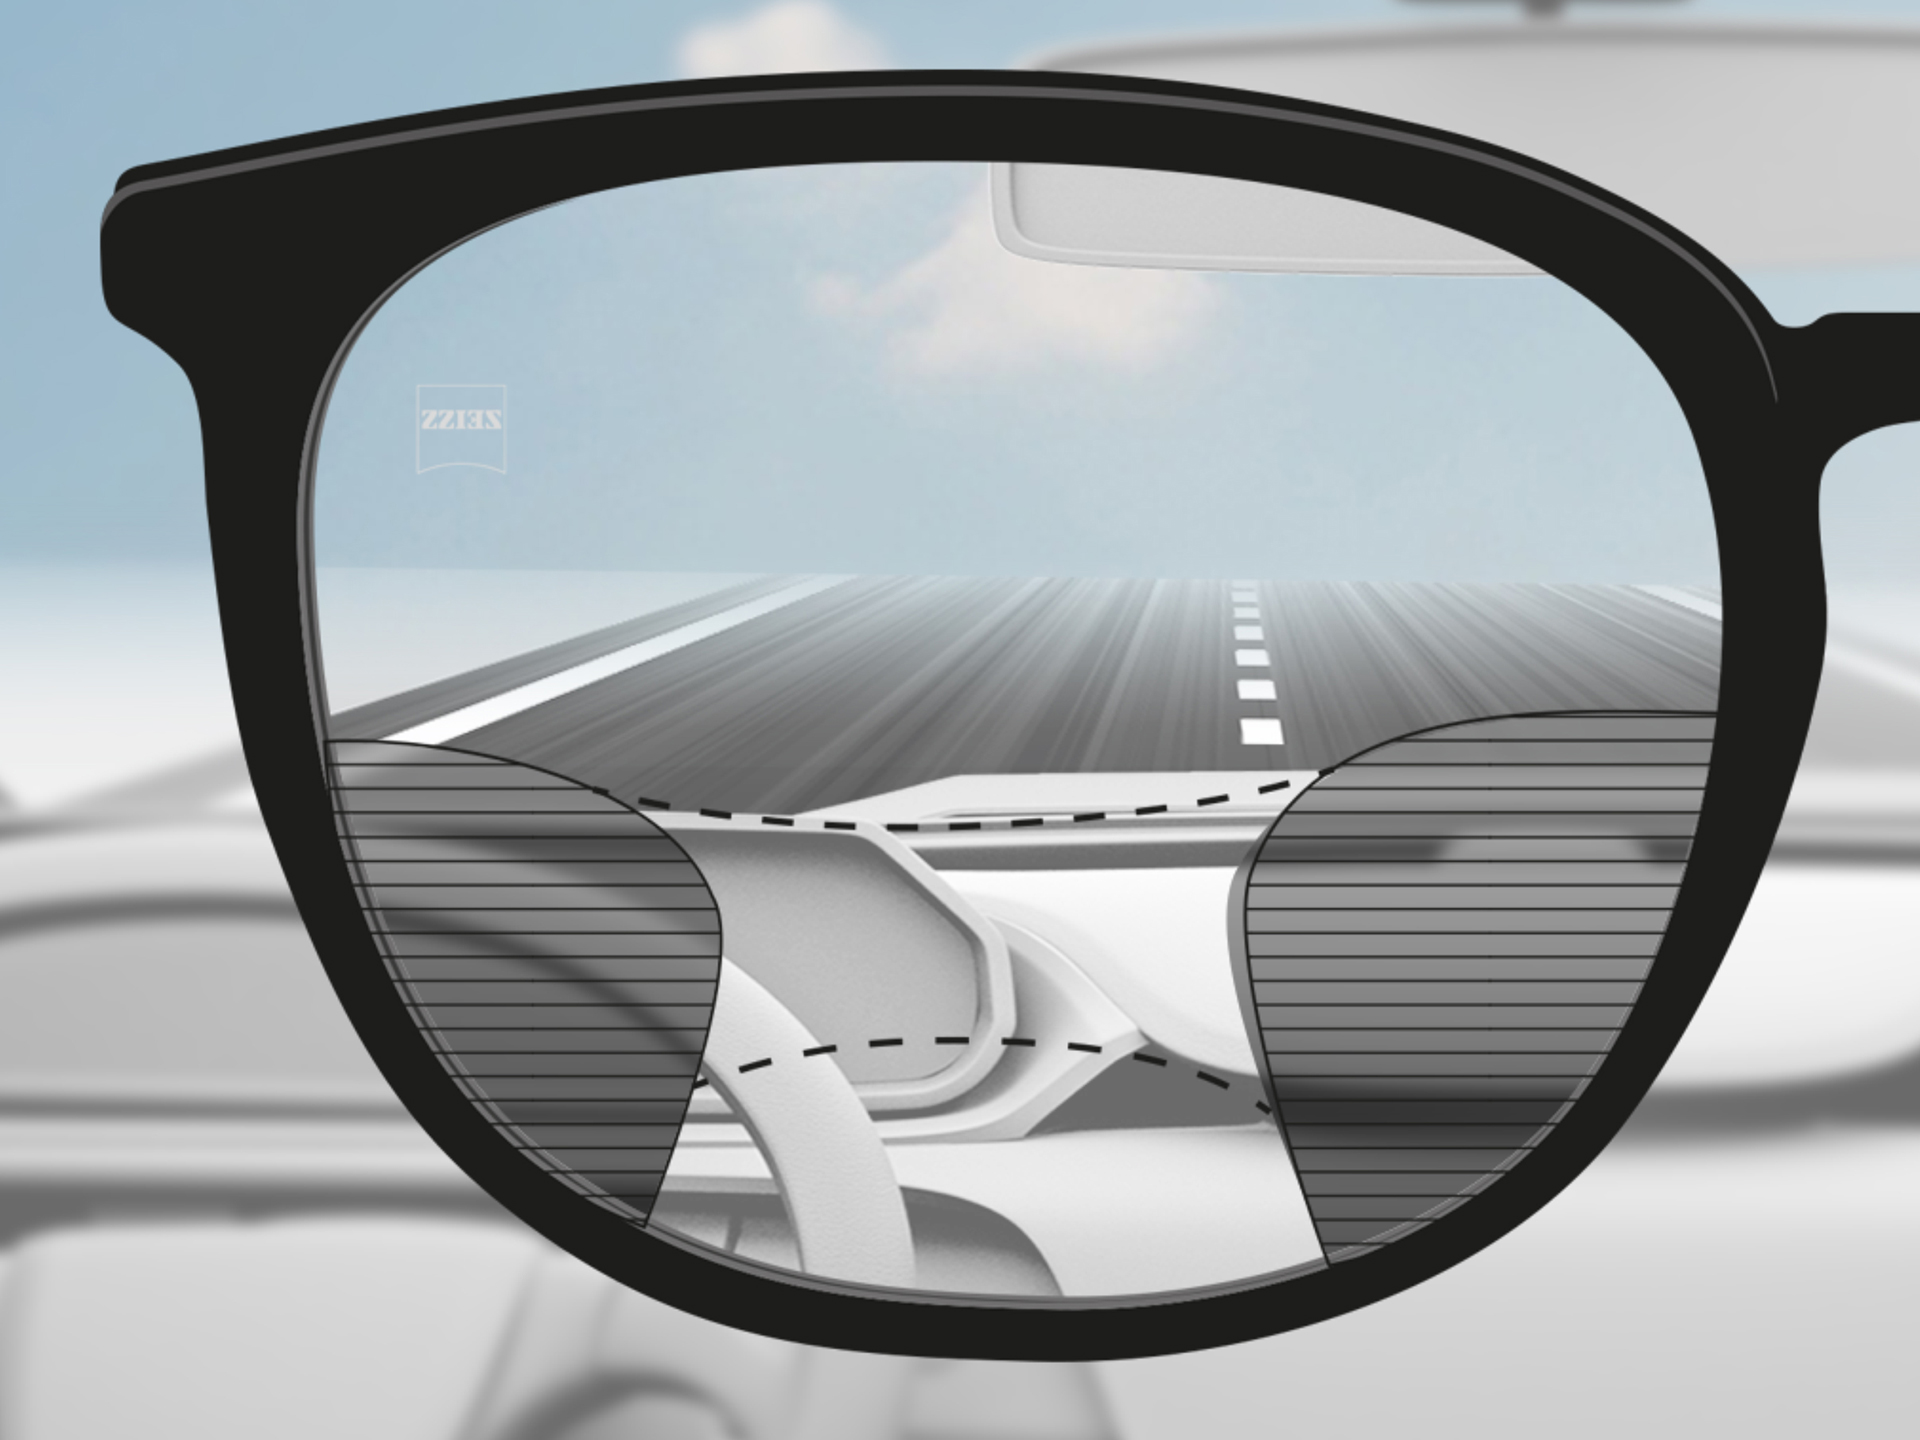 A point of view image through a ZEISS Progressive DriveSafe lens: The vision zones are adapted so the driver has clear vision zones on the road and dashboard.